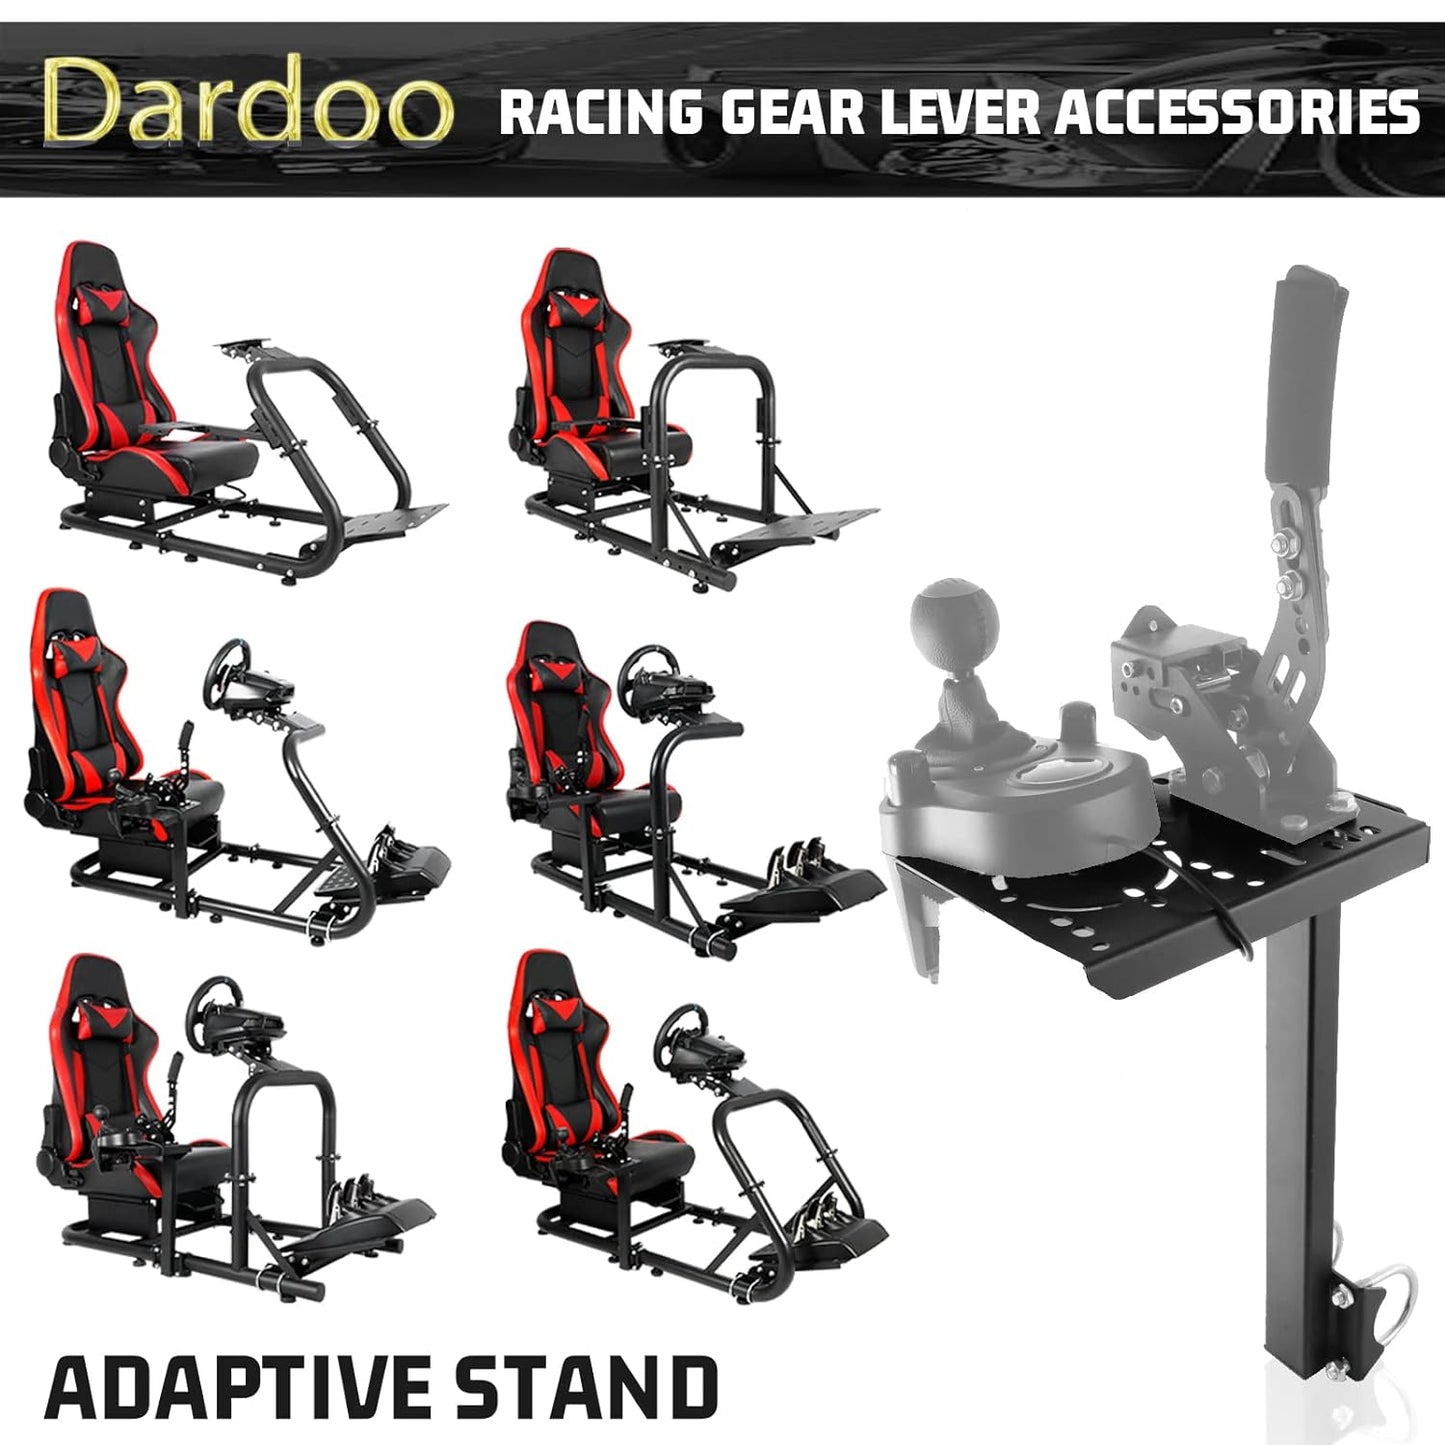 Dardoo Accessories Gear Shift platform is suitable for 50MM round pipe racing simulation cockpit gear lever frame